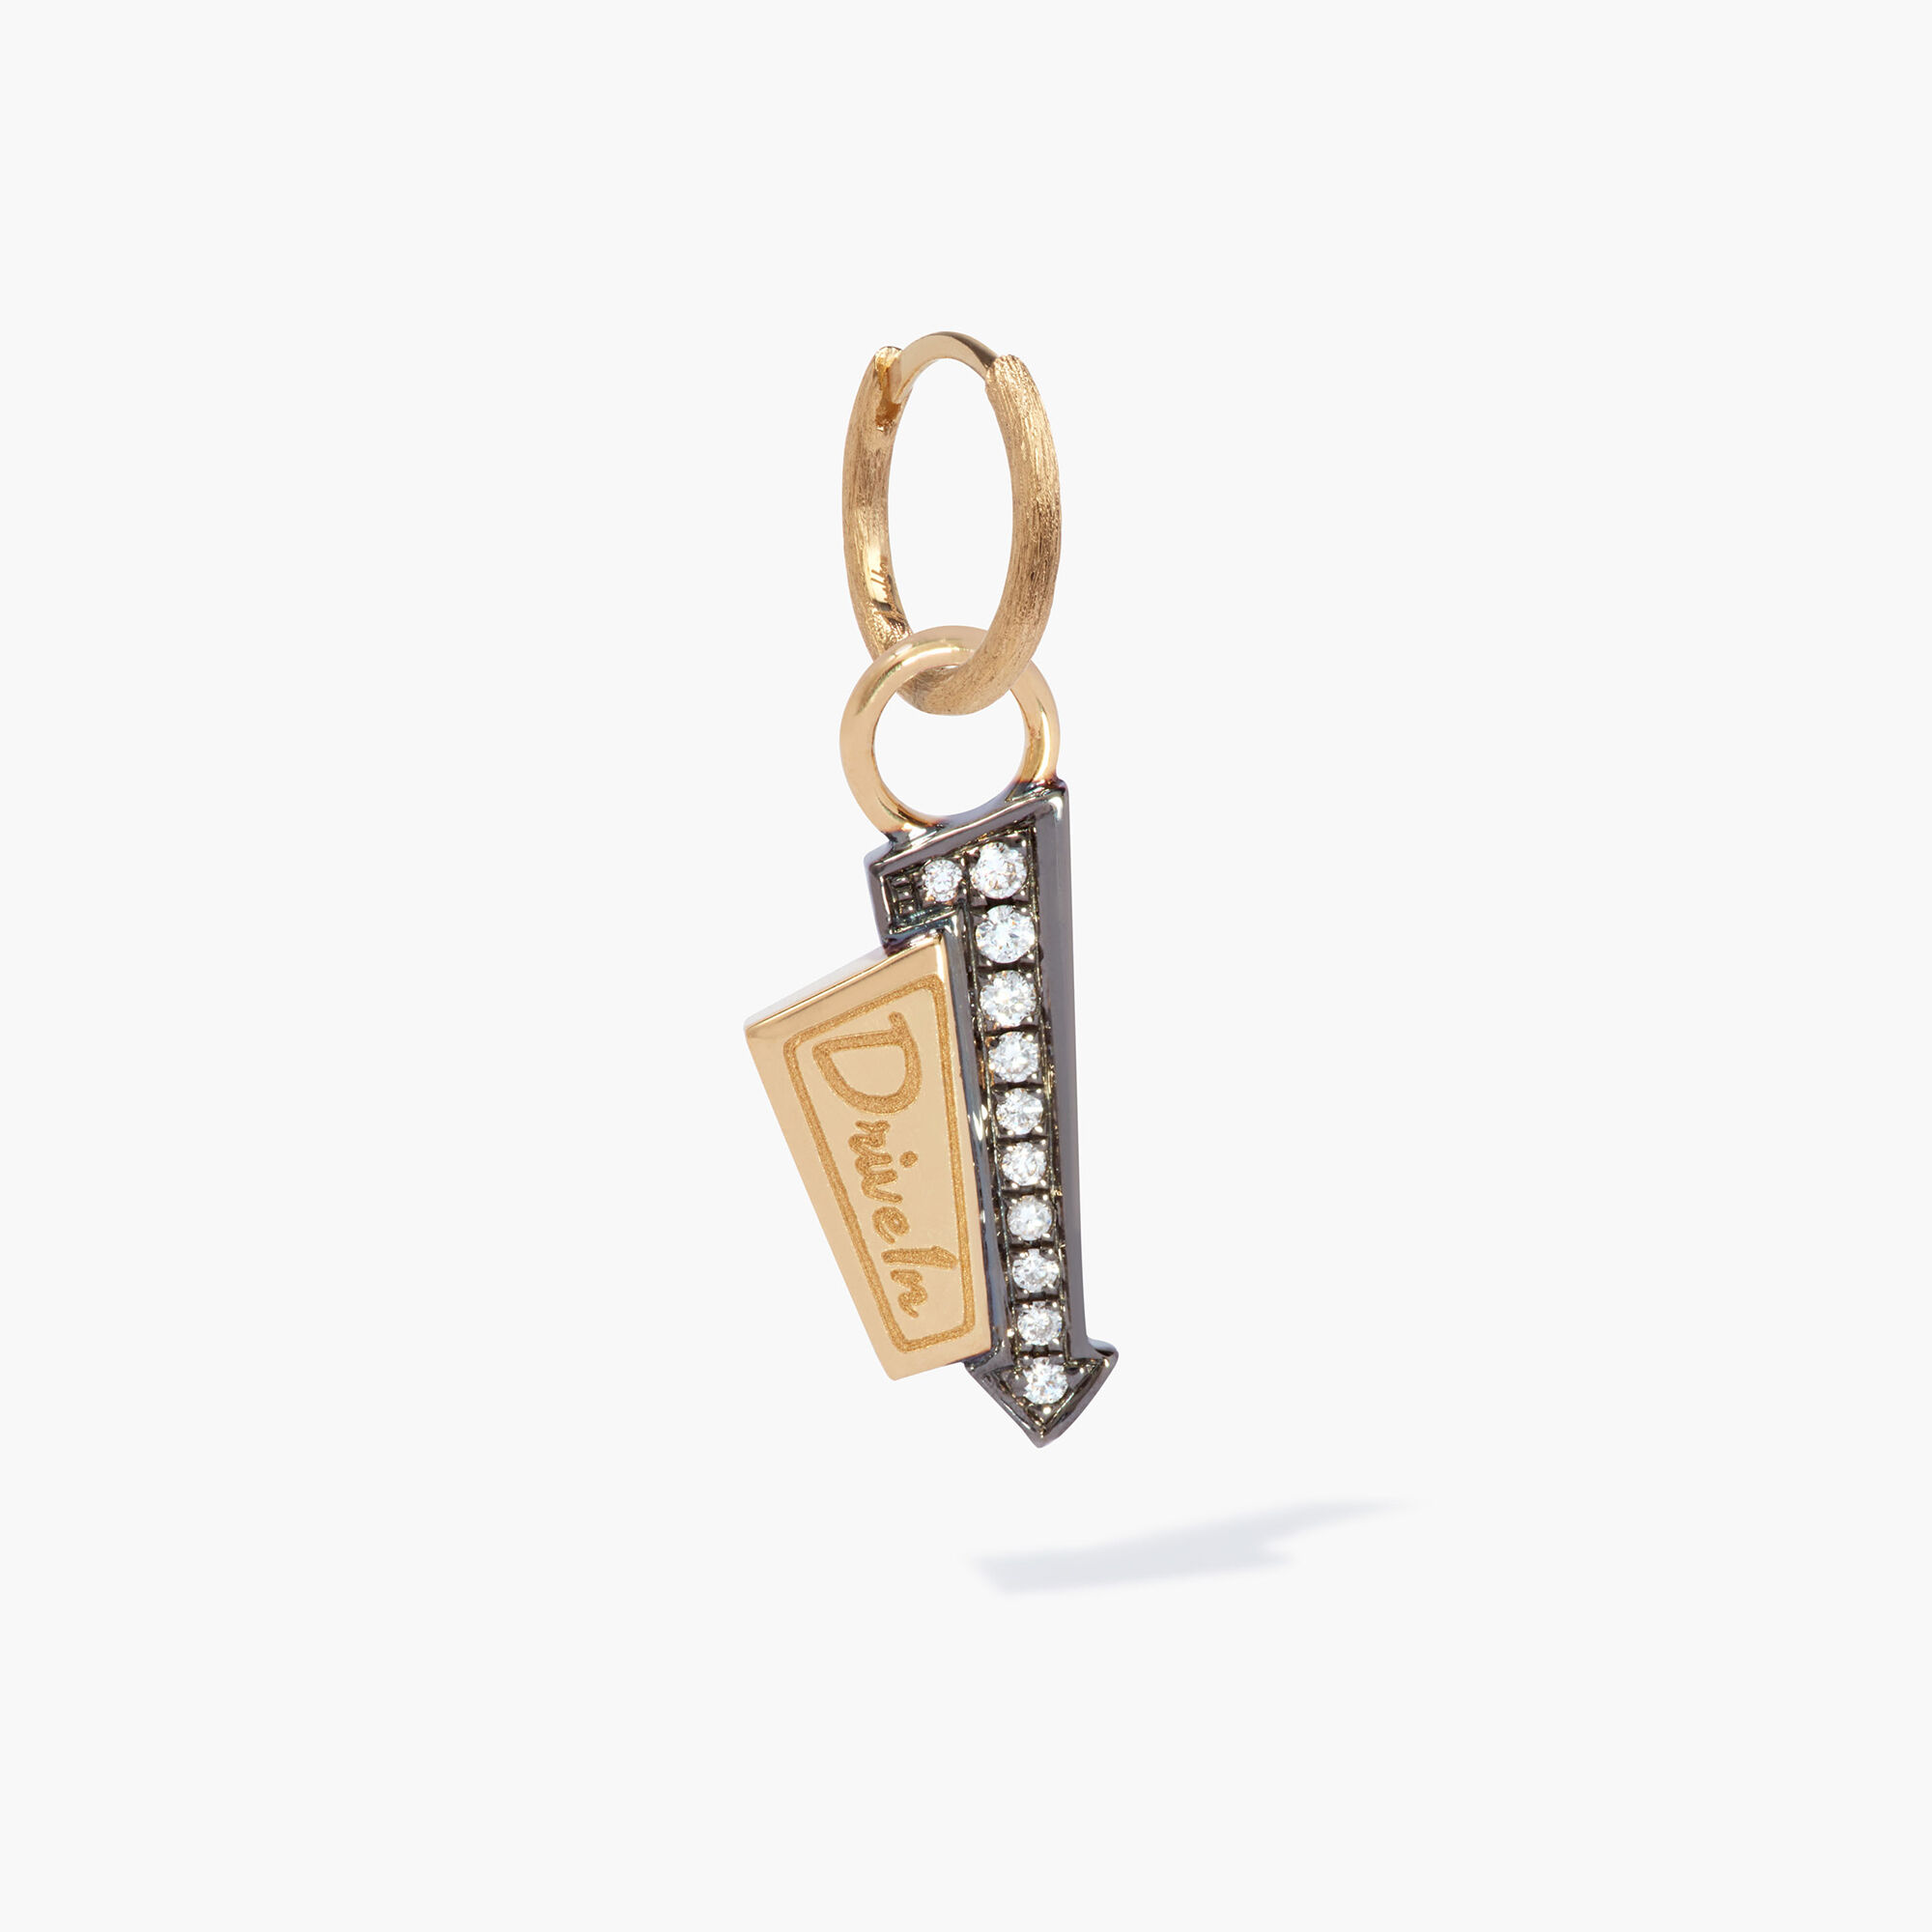 Golden Louis Vuitton Keychain with a golden keyring, vector, color